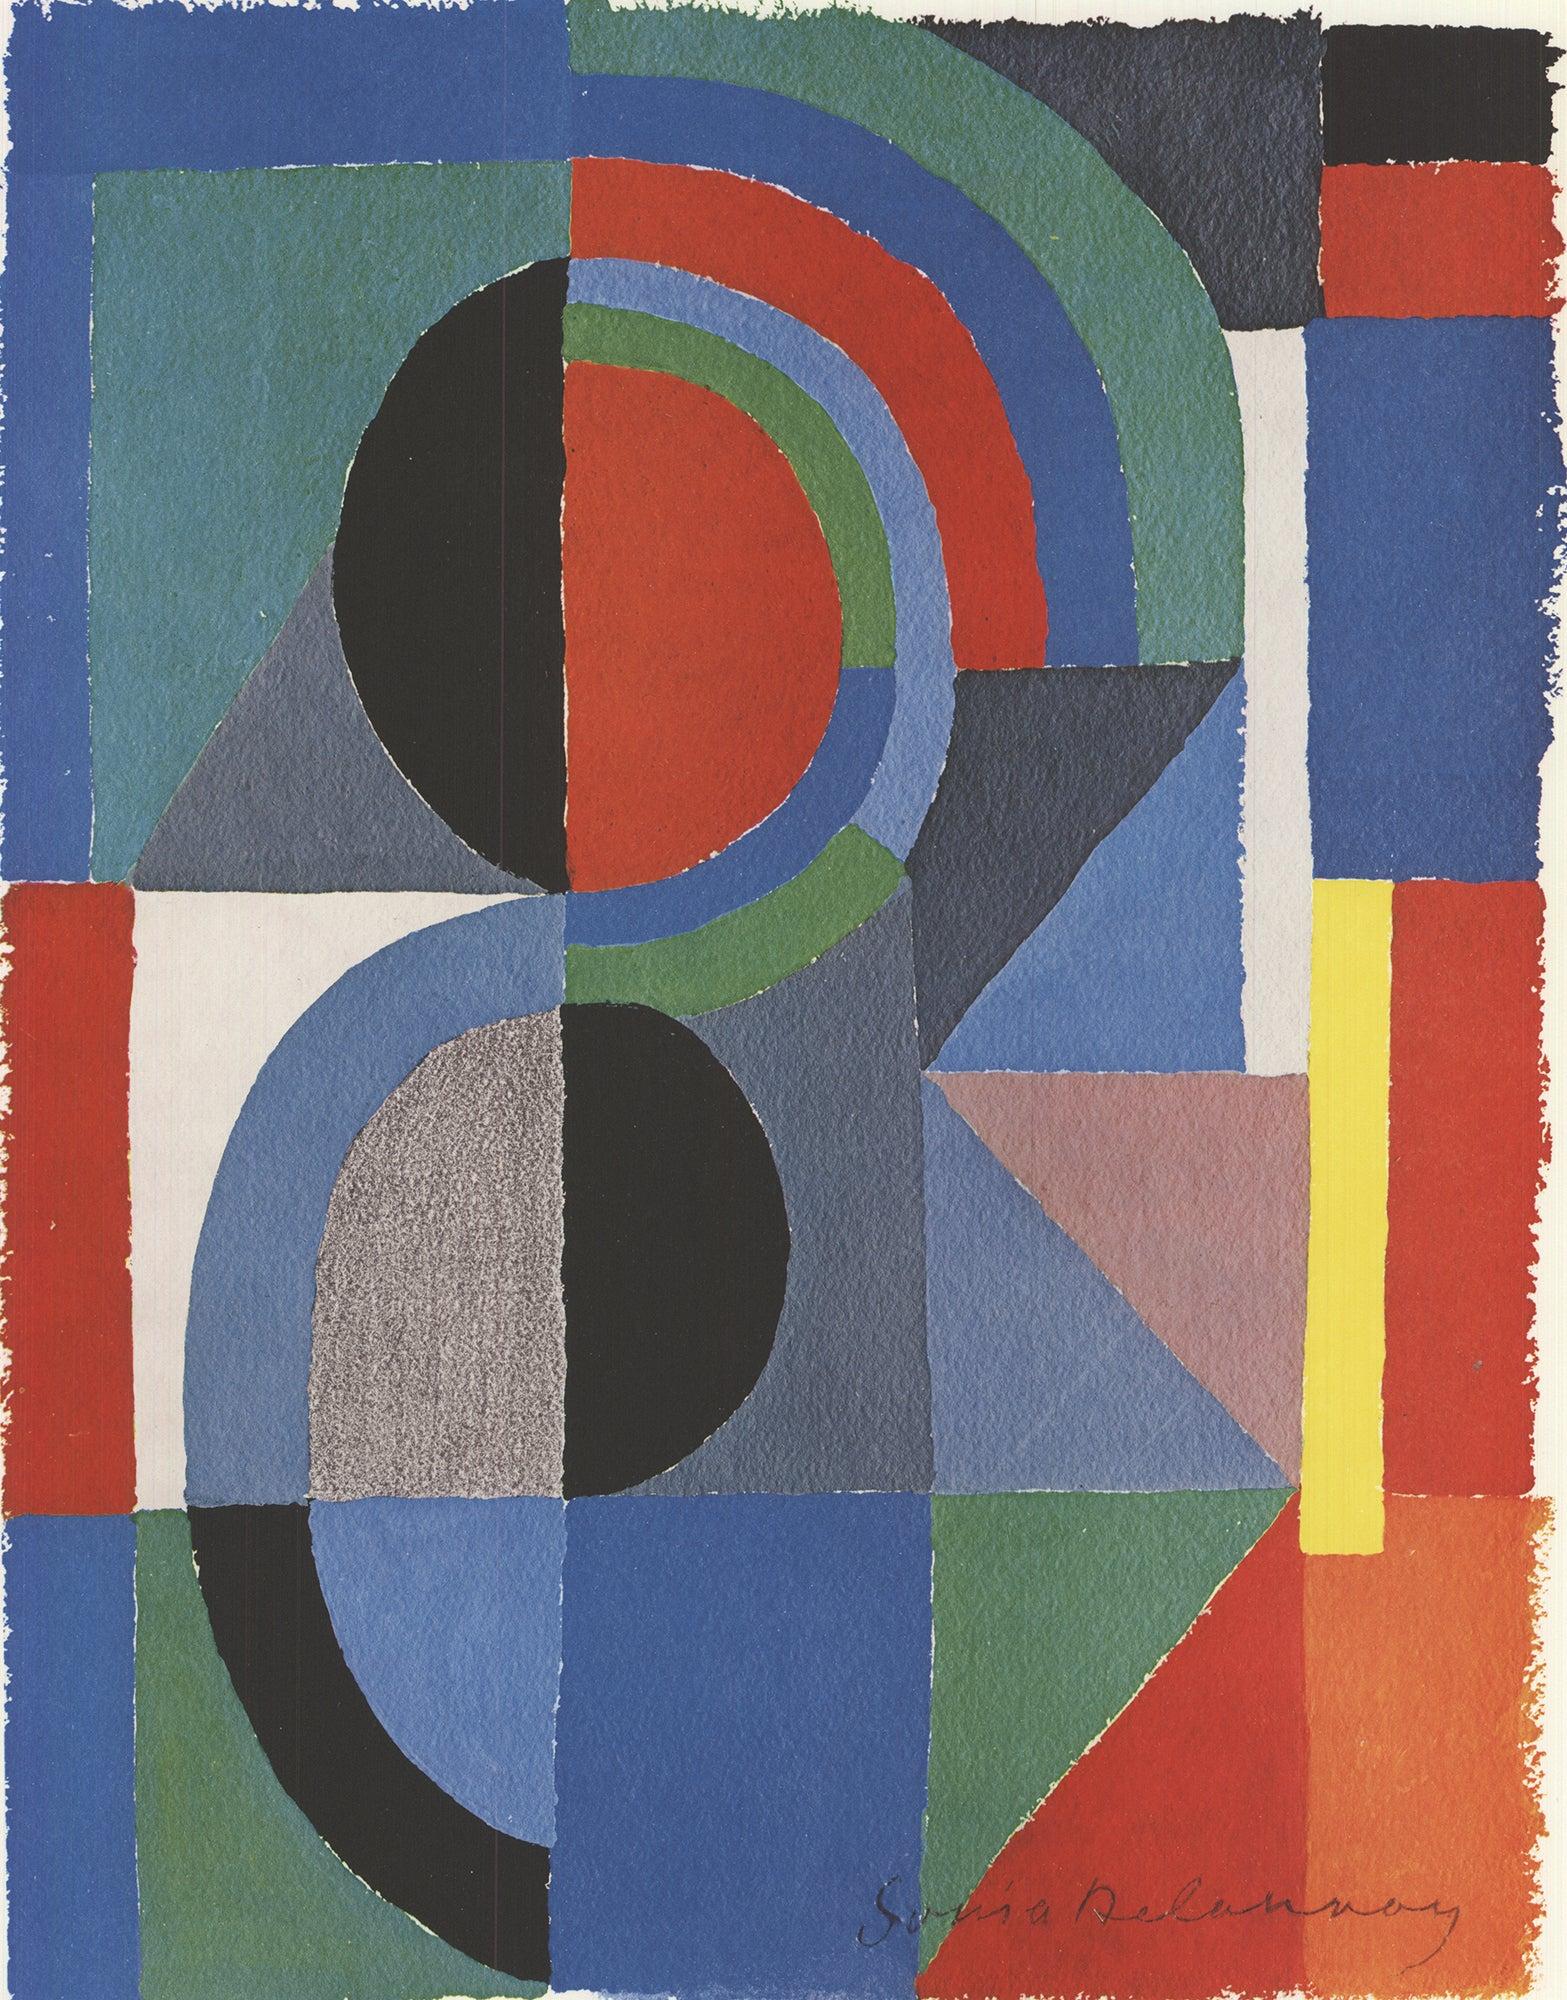 Sonia Delaunay 'Viertel' 1990- Offset Lithograph For Sale 1